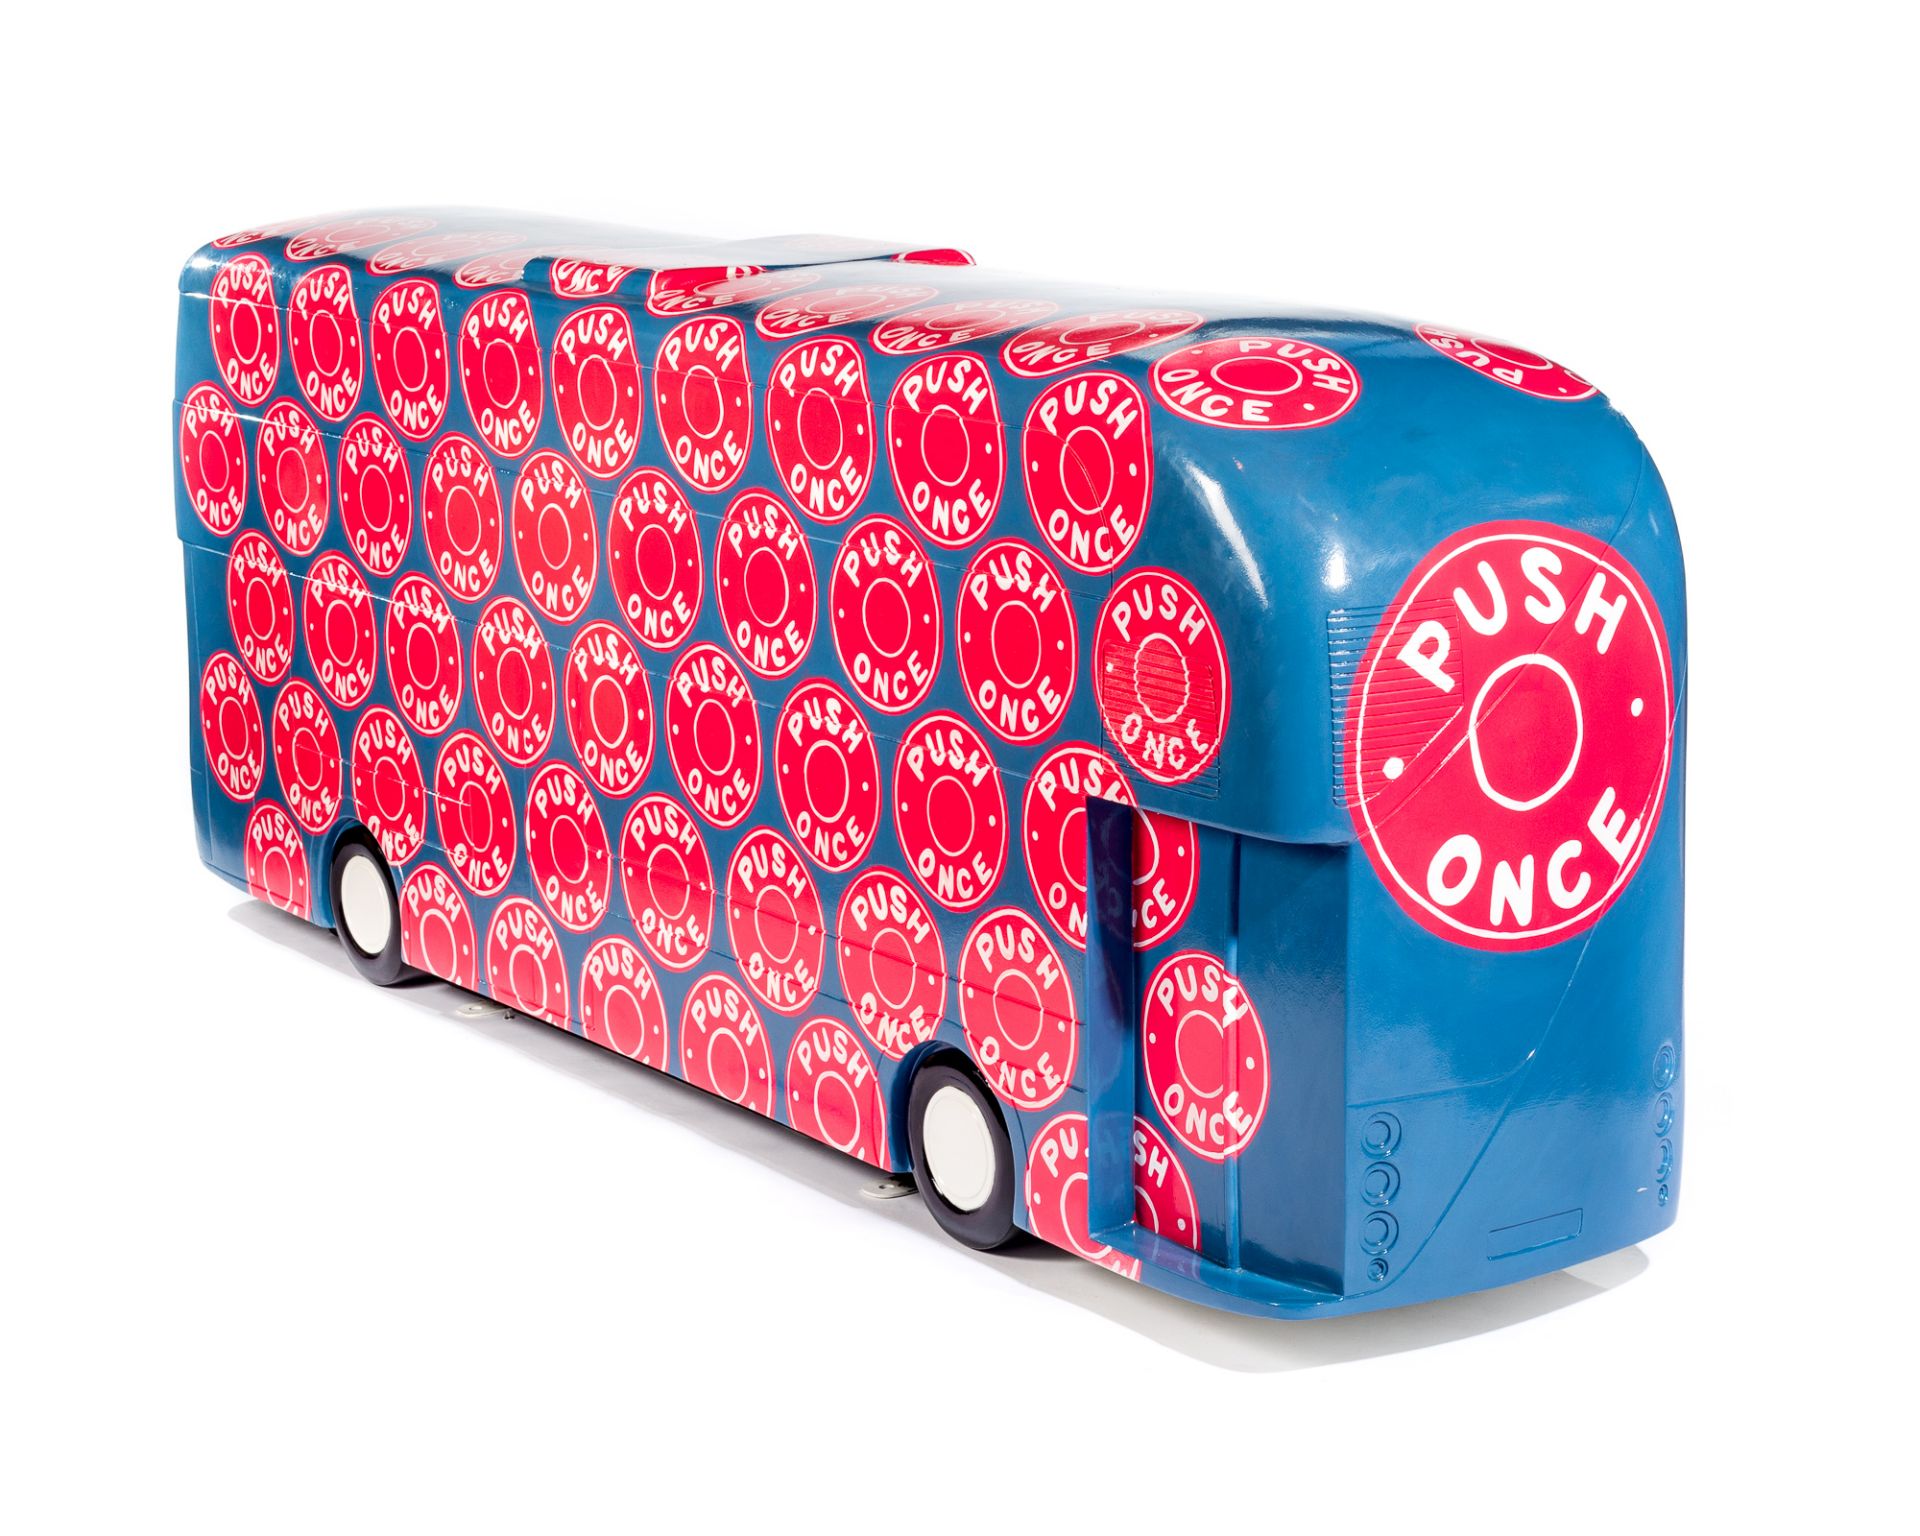 Artist: Mini Moderns, painted by Sophie Green  Design: Push Once    About the design   Launched in